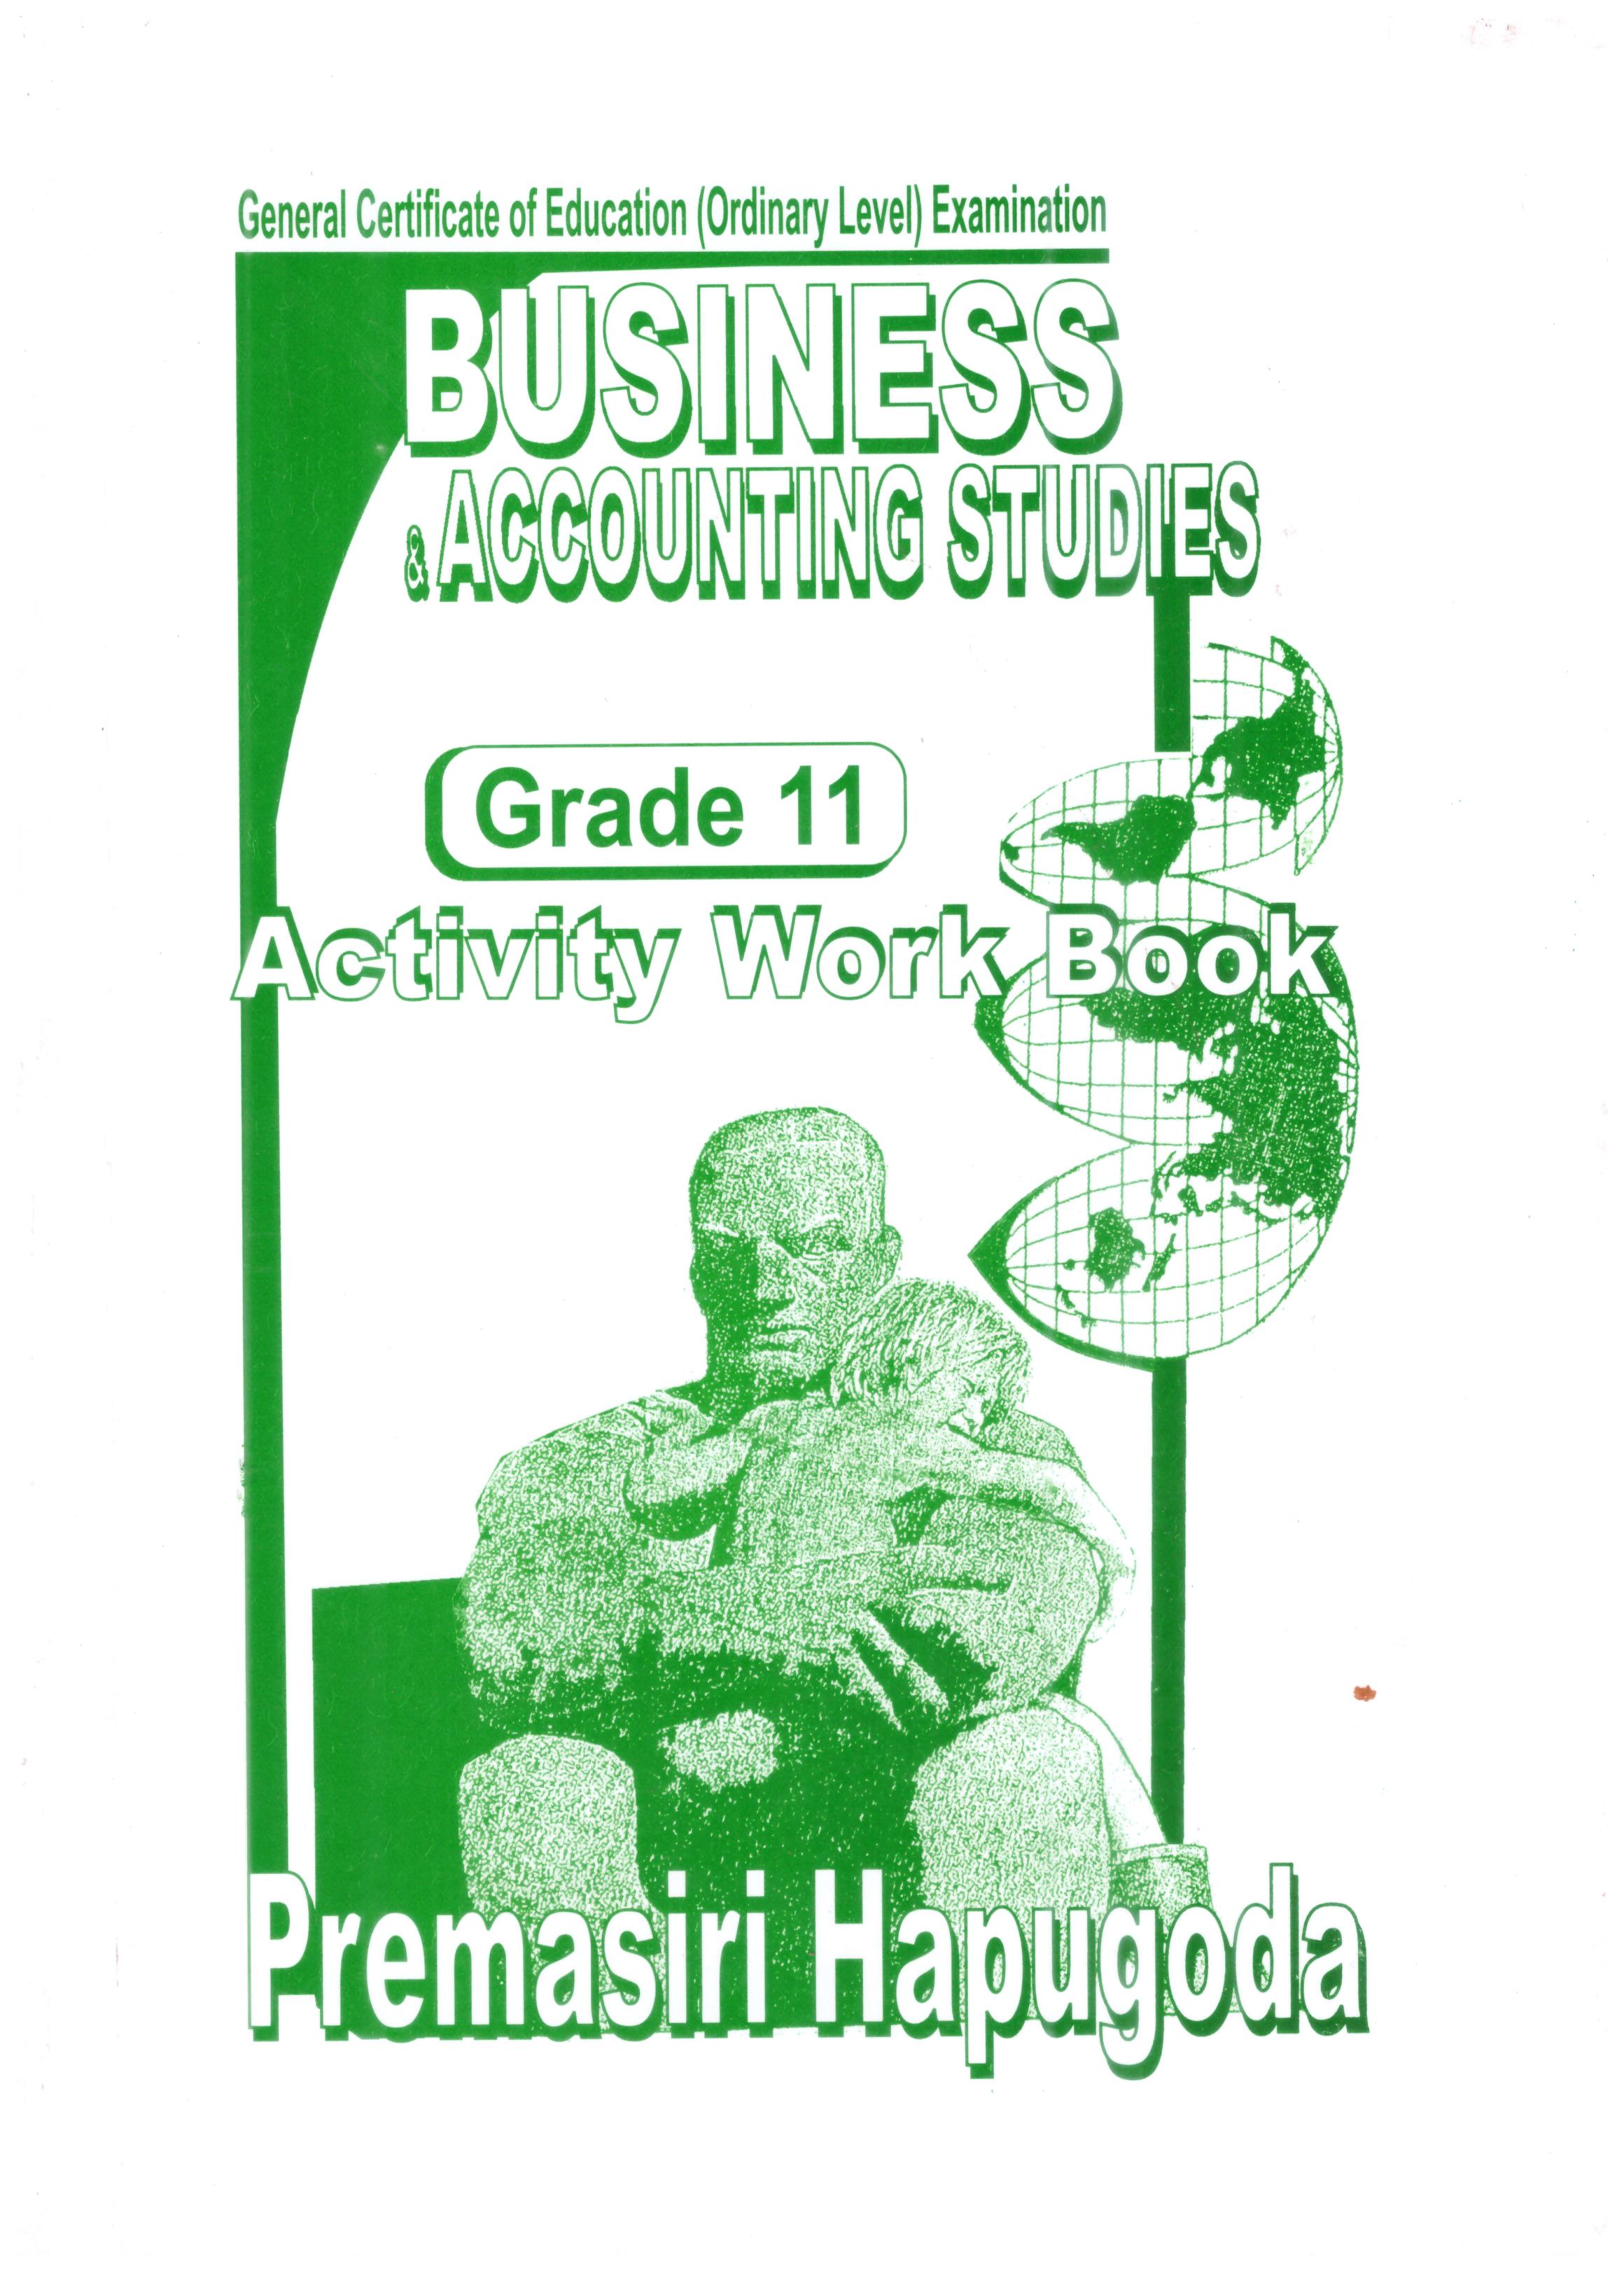 G.C.E. O/L Business and Accounting Studies Activity Work Book Grade 11